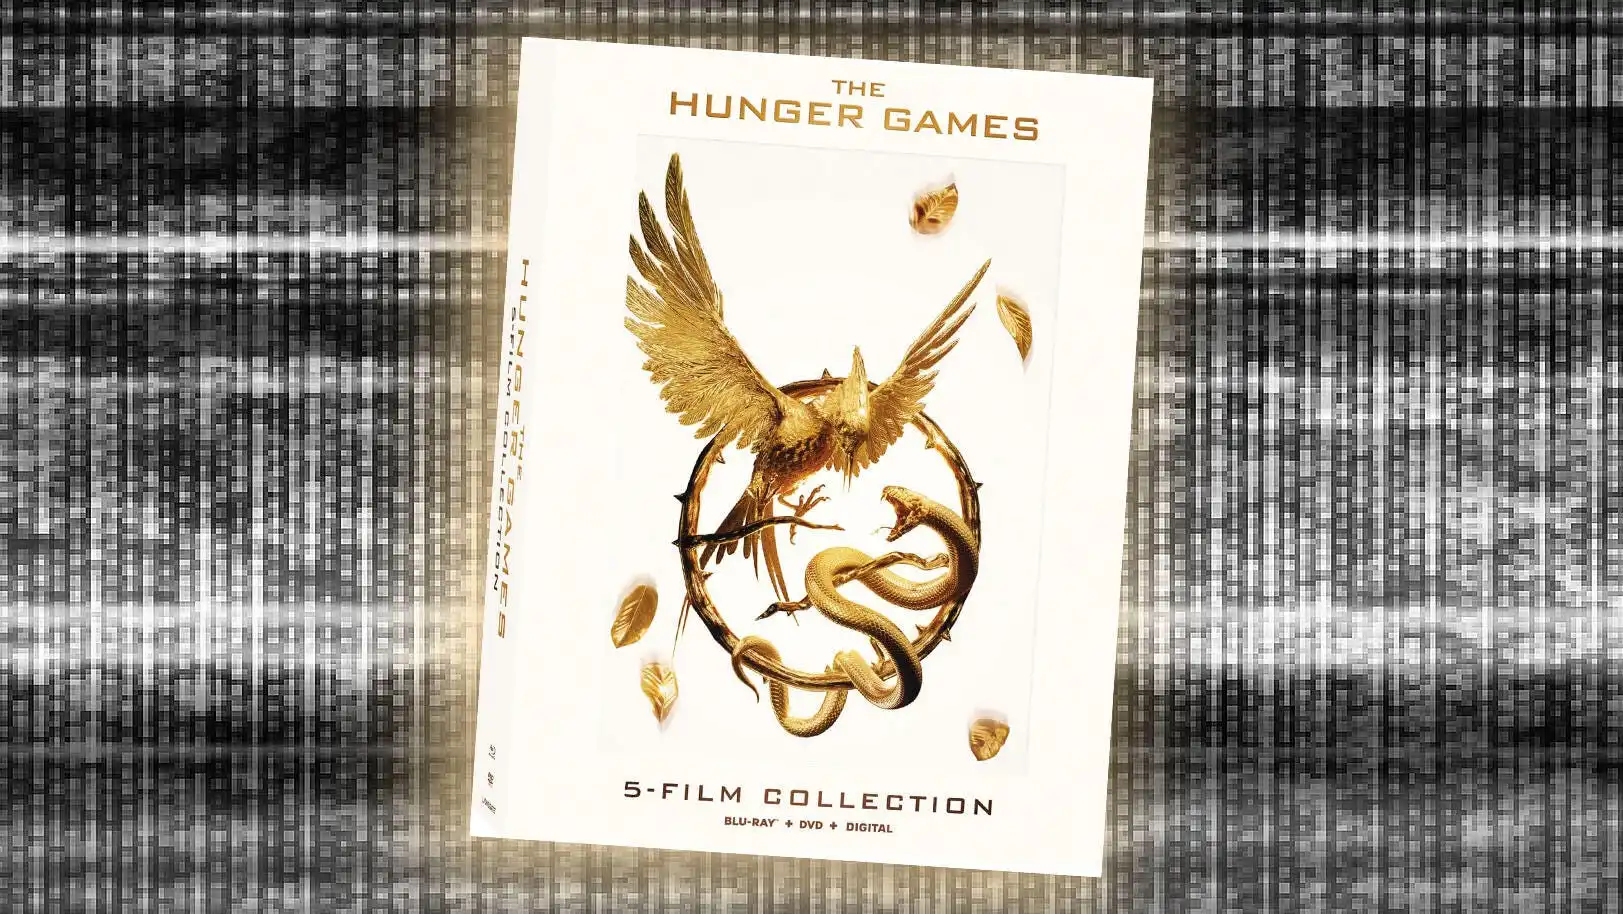 The Hunger Games Collection Blu-ray Pre-Order Now Available